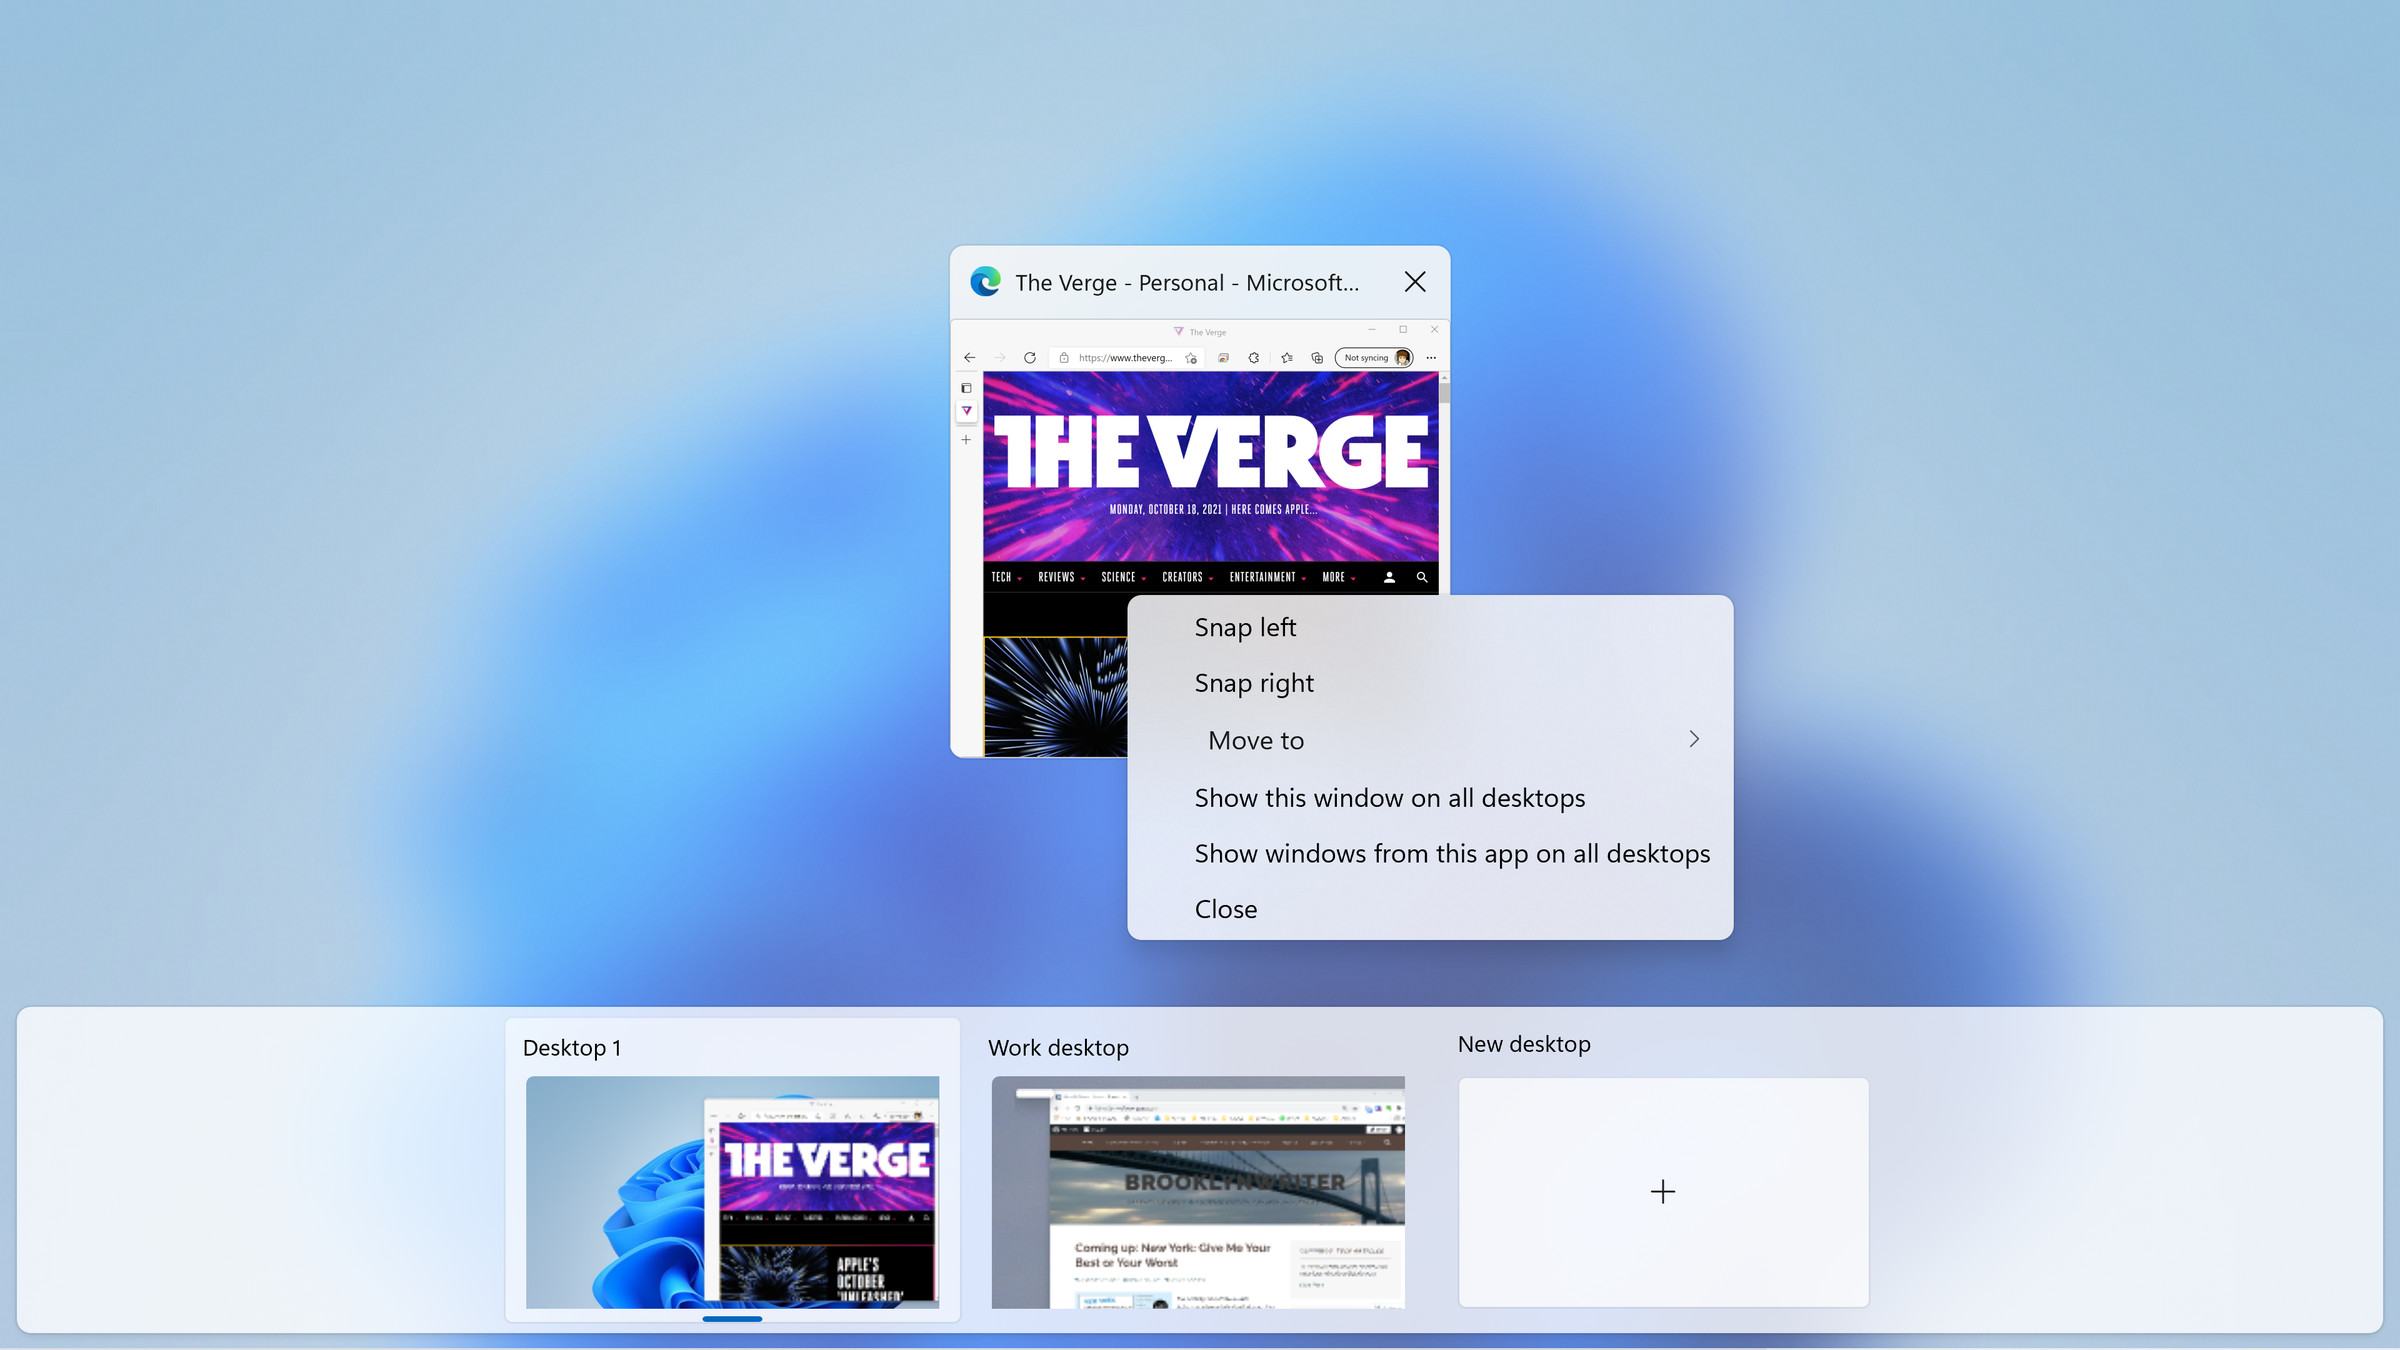 Use “Show this window on all desktops” to use the same app and content in your other desktops.